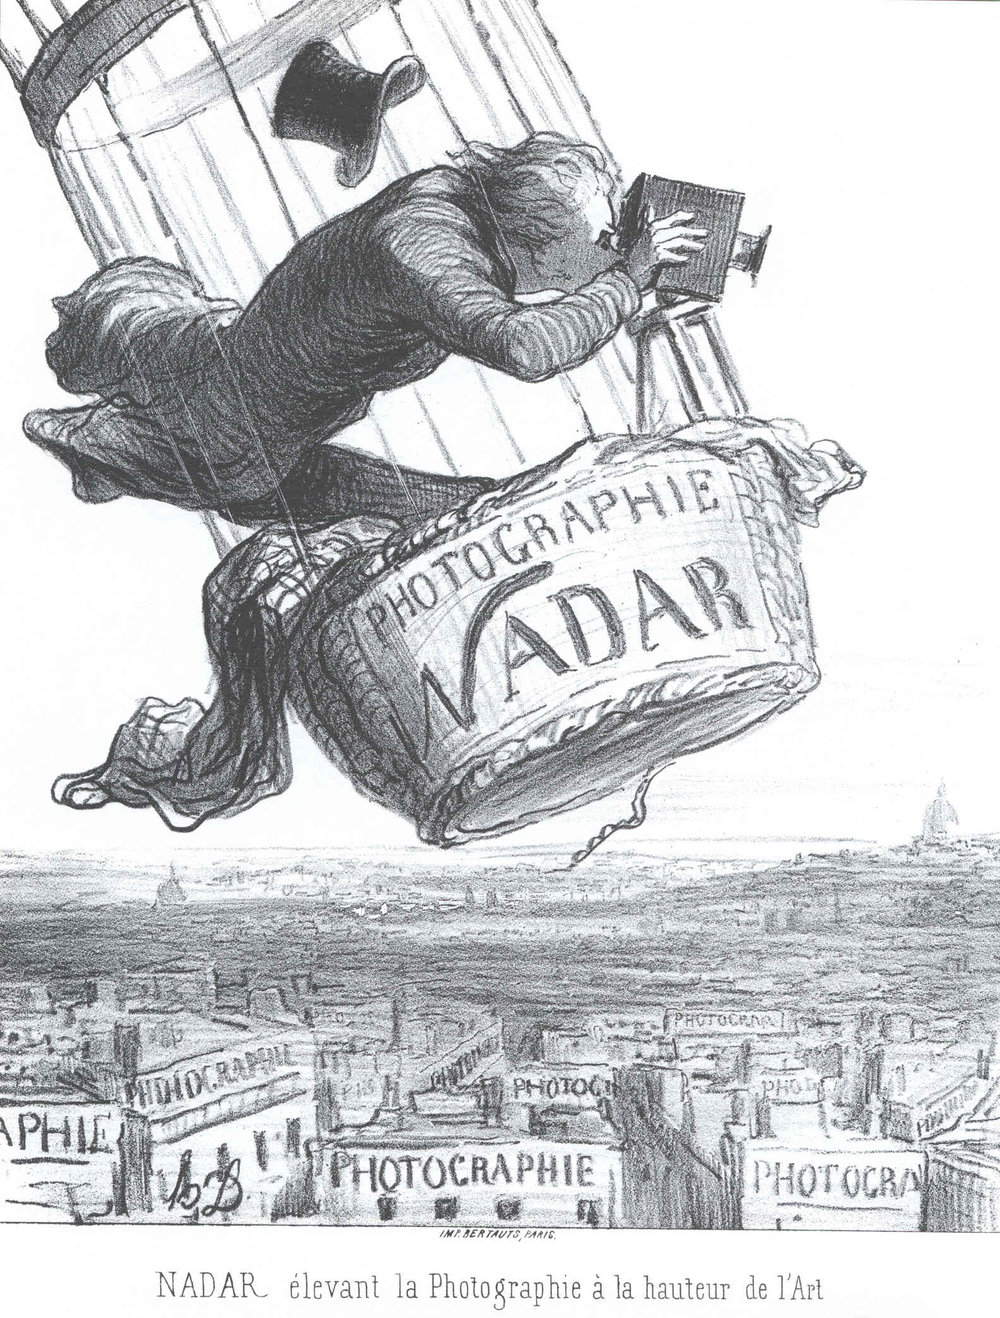 19th Century Cartoons Poke Fun at Photography — Online - Don't Take Pictures